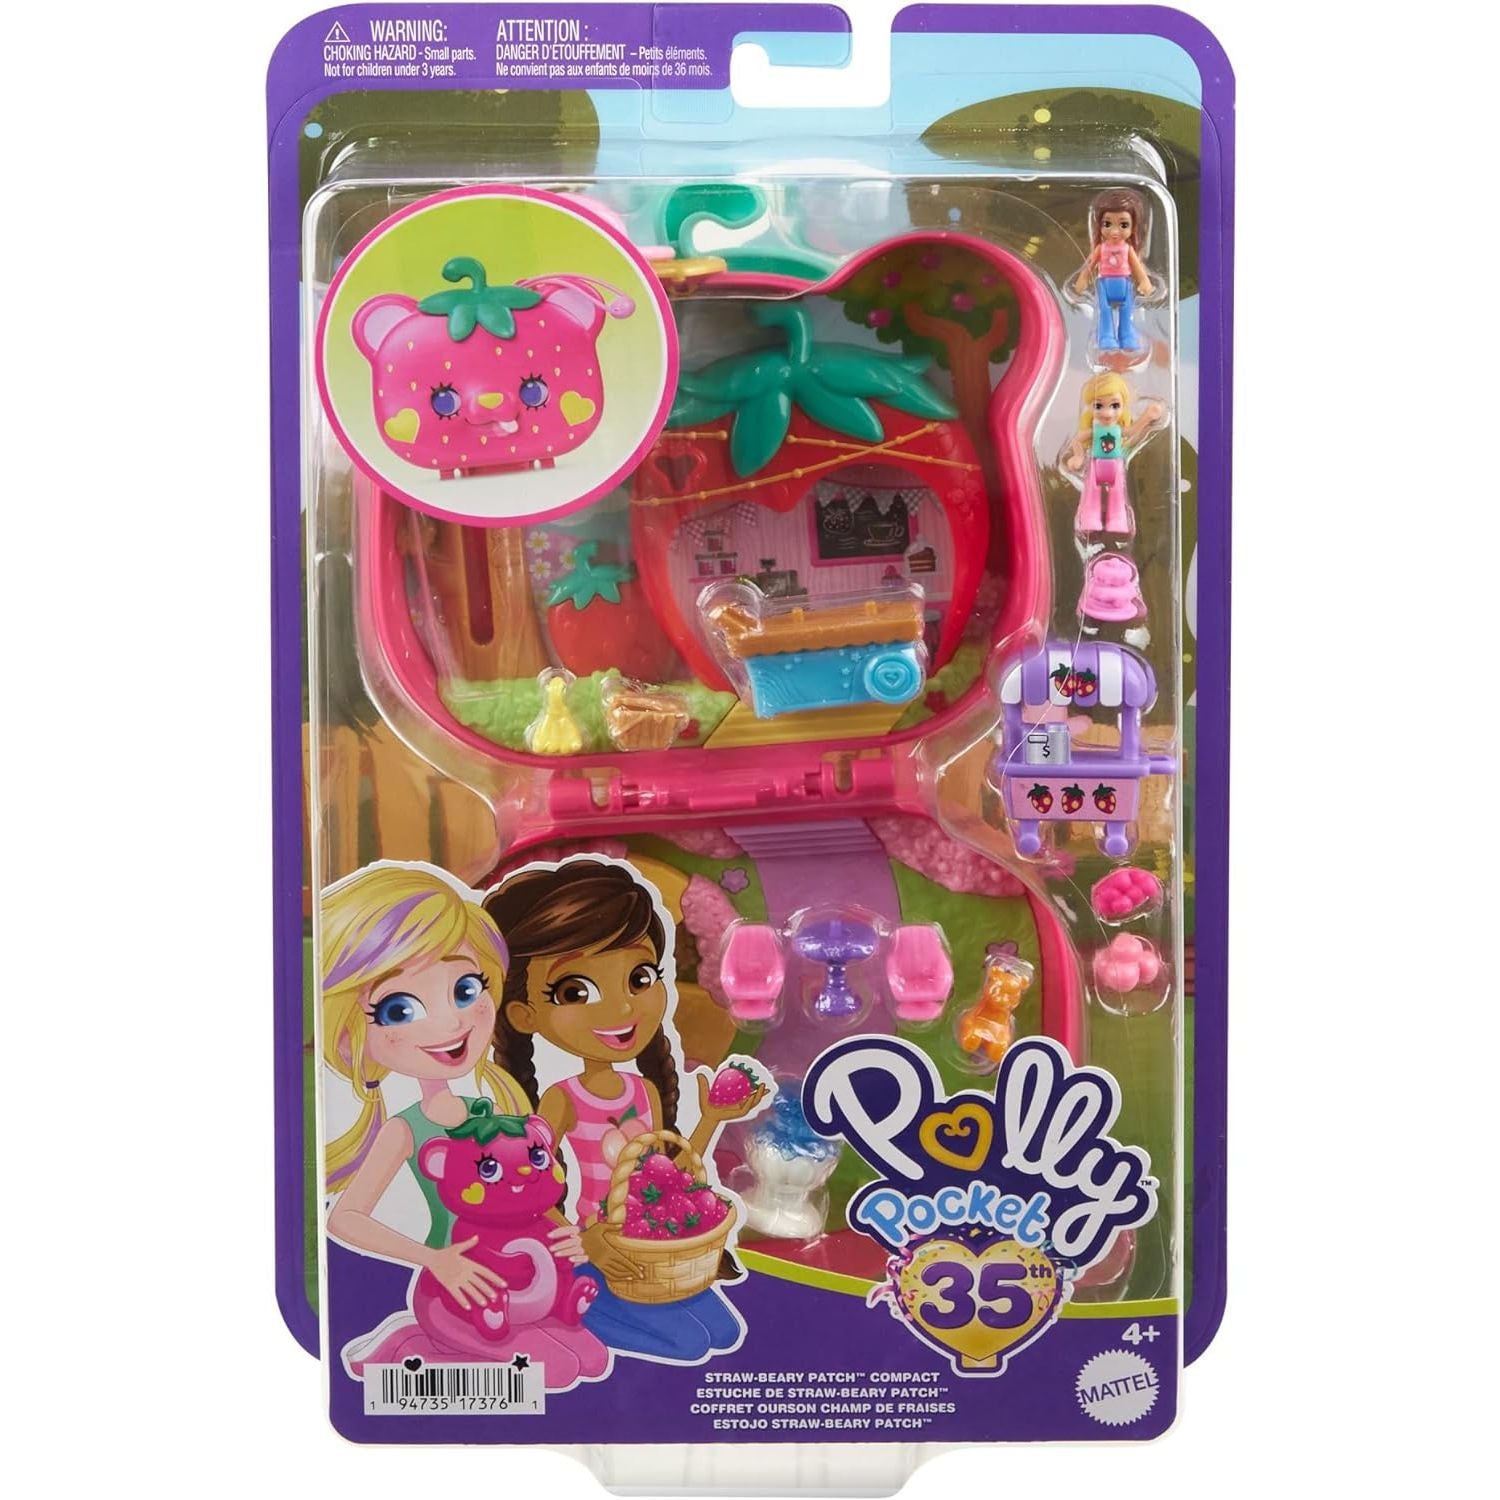 Polly Pocket Straw-Beary Patch Compact Polly Pocket